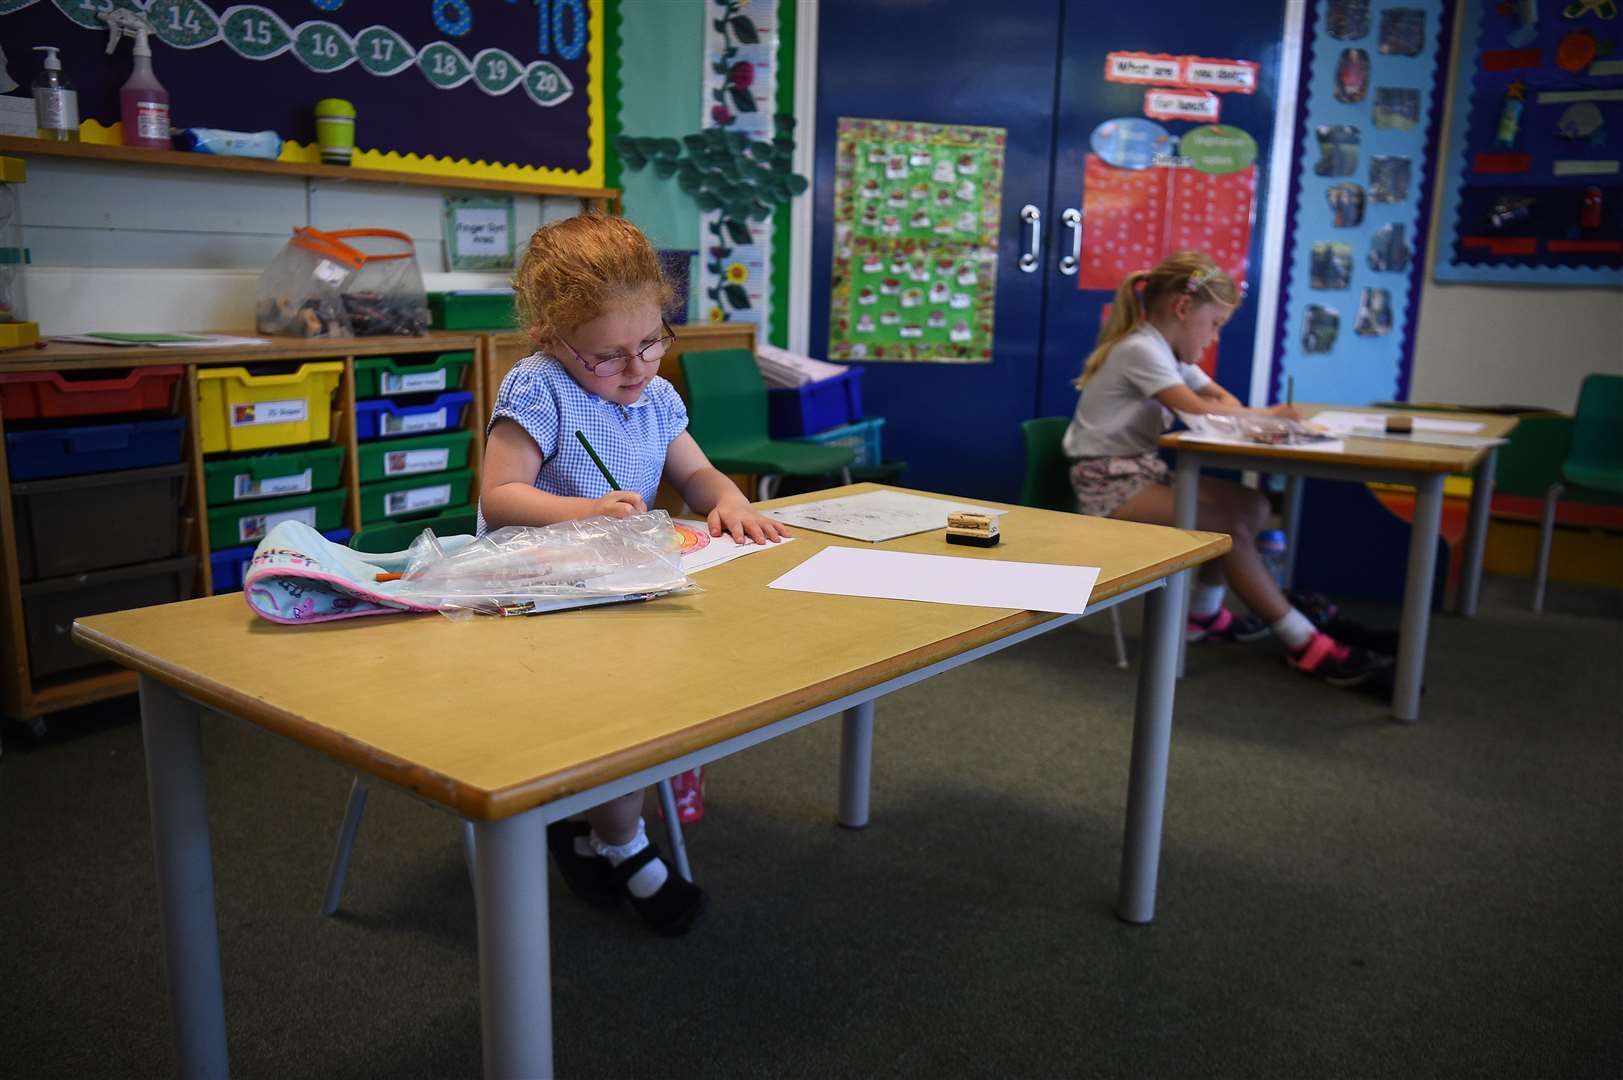 Pupils sit at separate desks at Hiltingbury Infant School in Hampshire (Kirsty O’Connor/PA)